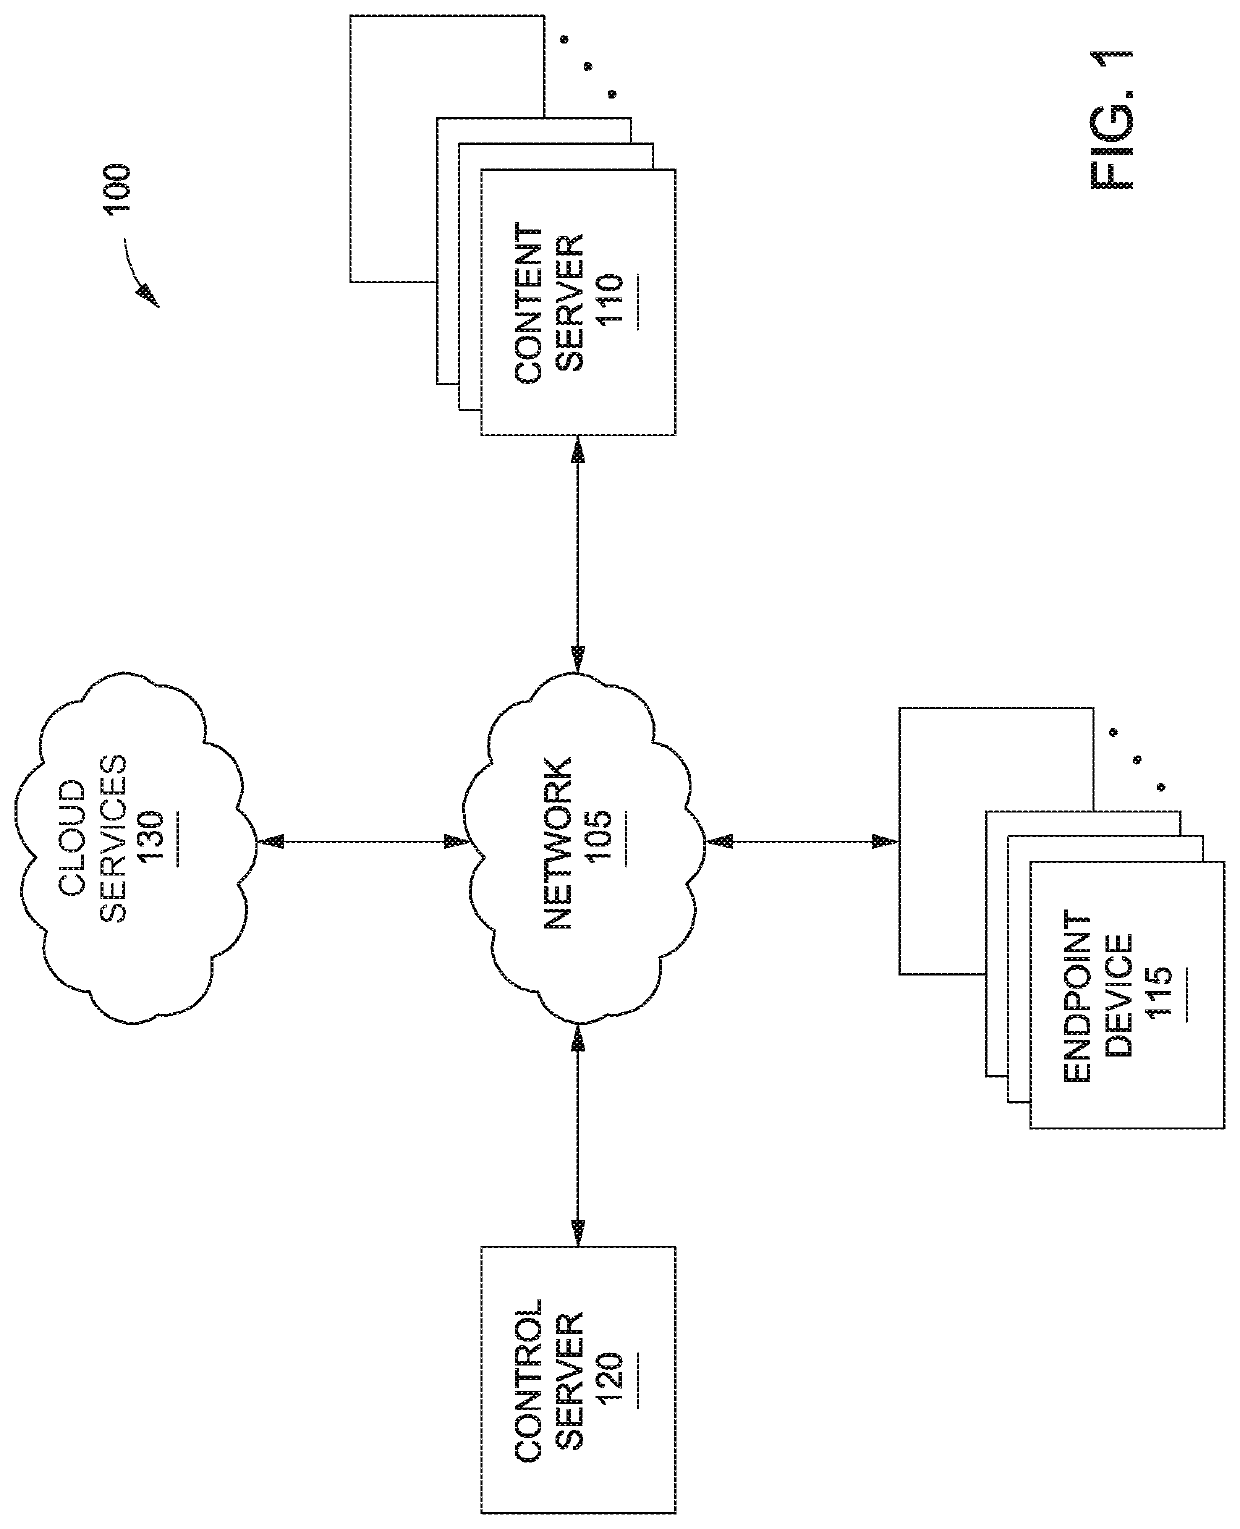 Determining the failure resiliency of a service in a distributed computing system